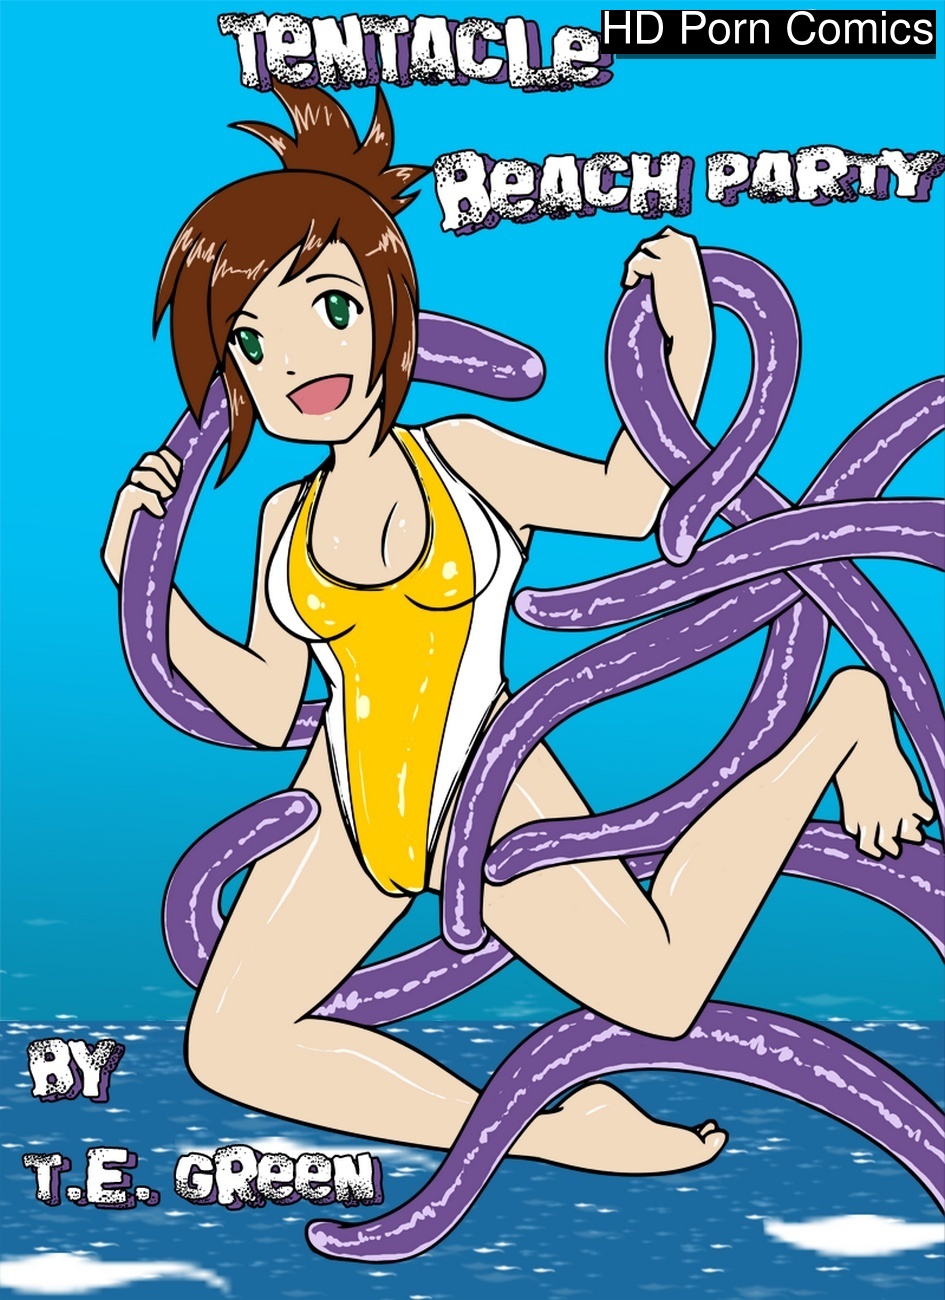 Cartoon Porn Sex On The Beach - A Date With A Tentacle Monster 2 - Tentacle Beach Party Sex Comic â€“ HD Porn  Comics